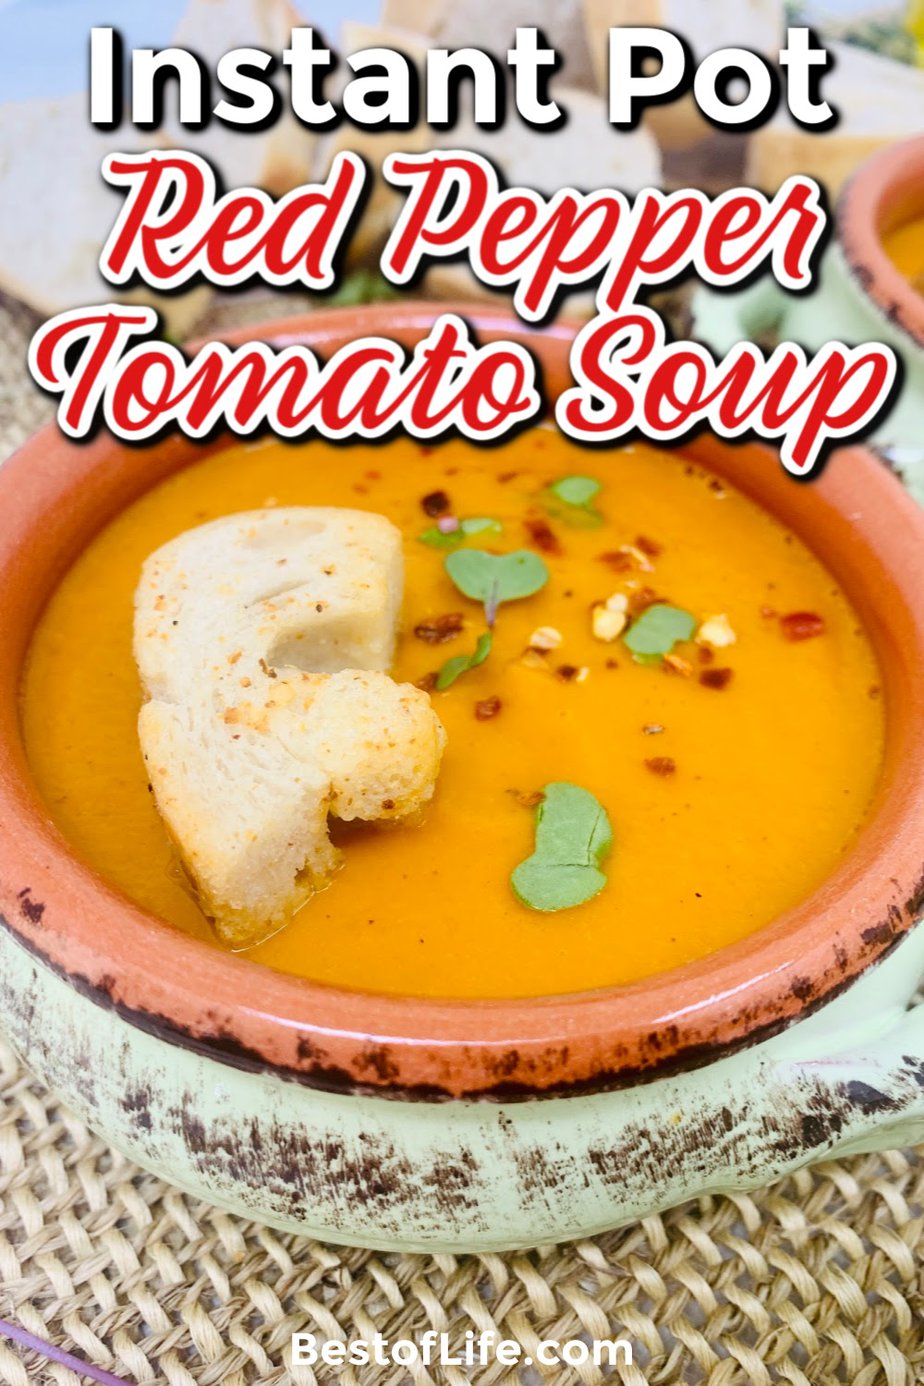 You can easily make Instant Pot red pepper tomato soup for dinner any night of the week or even pack it up for a healthy lunch on the go. Instant Pot Soup Recipes Healthy | Instant Pot Lunch Recipes | Homemade Tomato Soup Recipe | Instant Pot Soup Recipe | Instant Pot Meal Planning | On The Go Recipes for Lunch | Tomato Soup Recipes #instantpot #soup via @thebestoflife